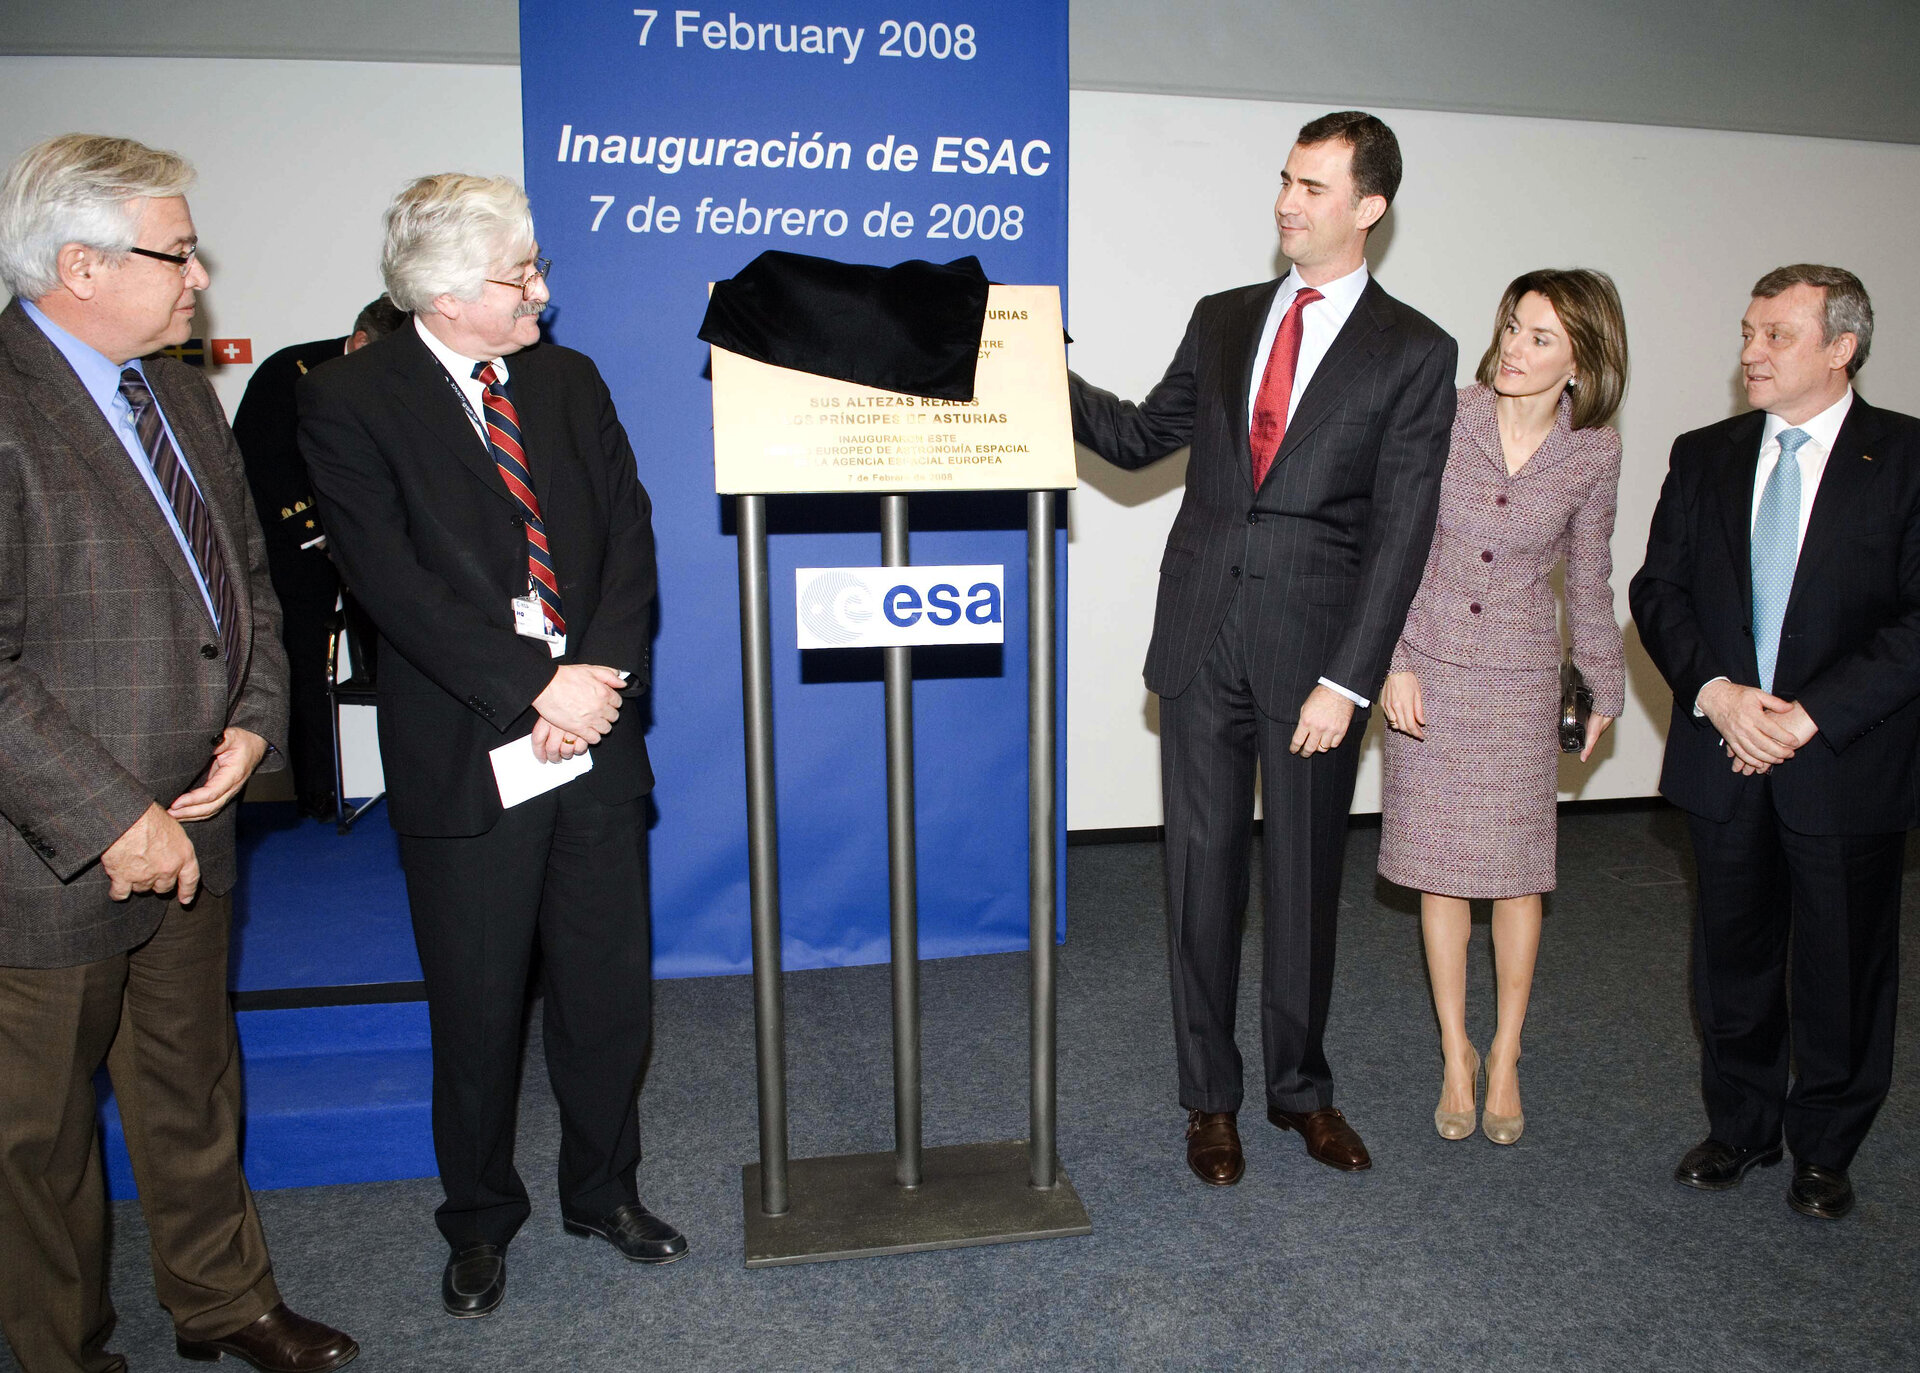 The Prince unveils the inauguration plaque at ESAC